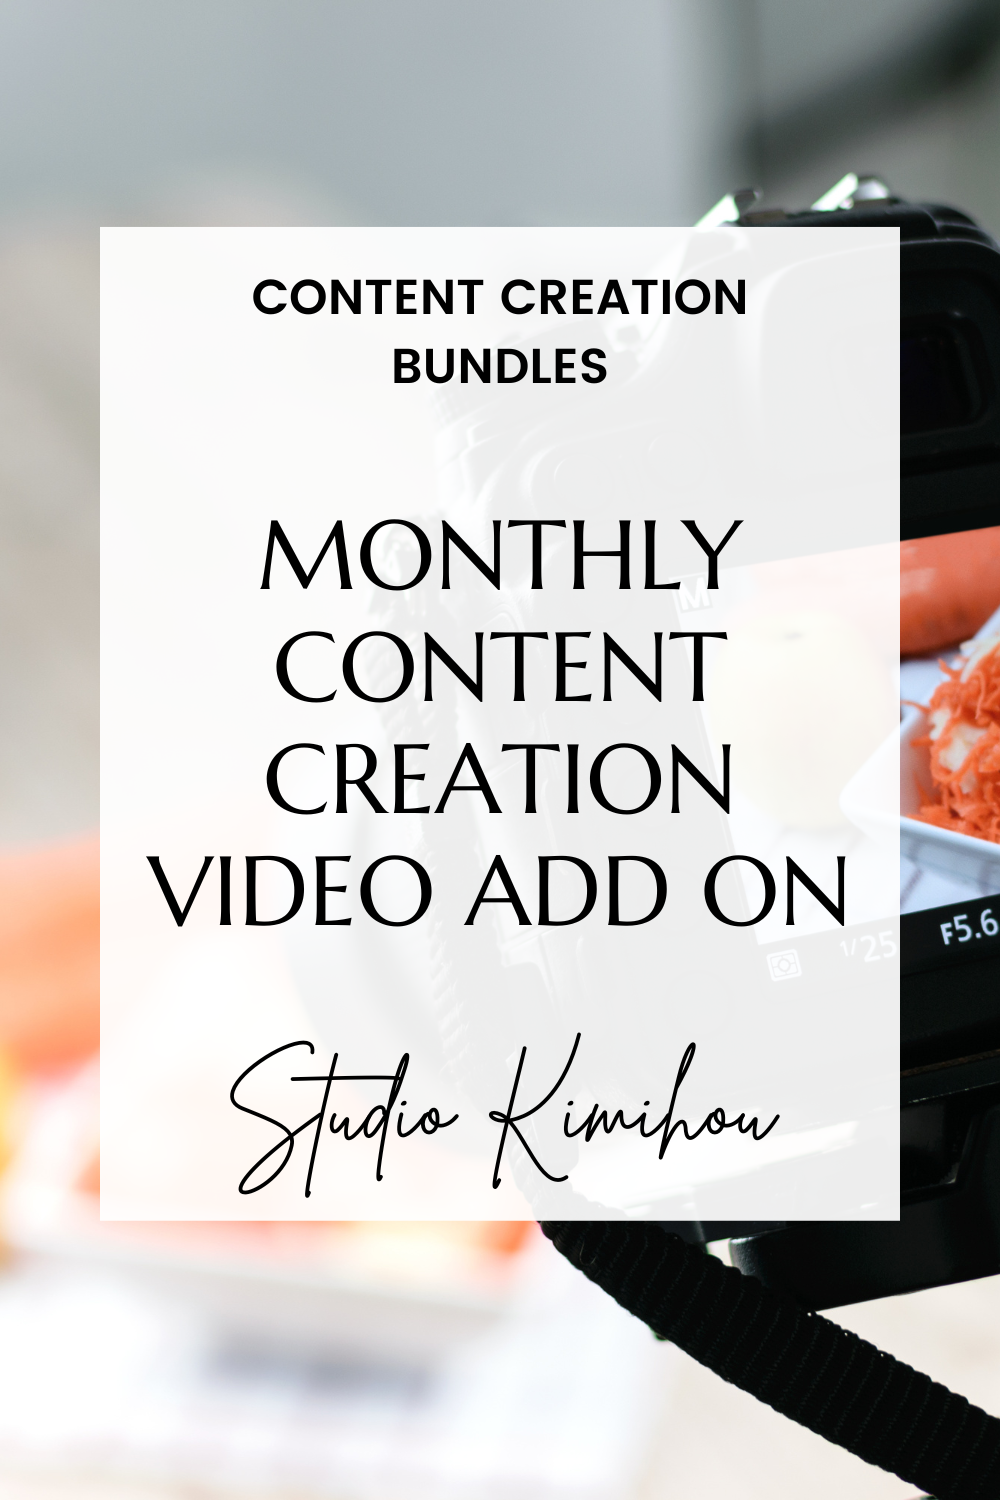 Content Creation Video Add On